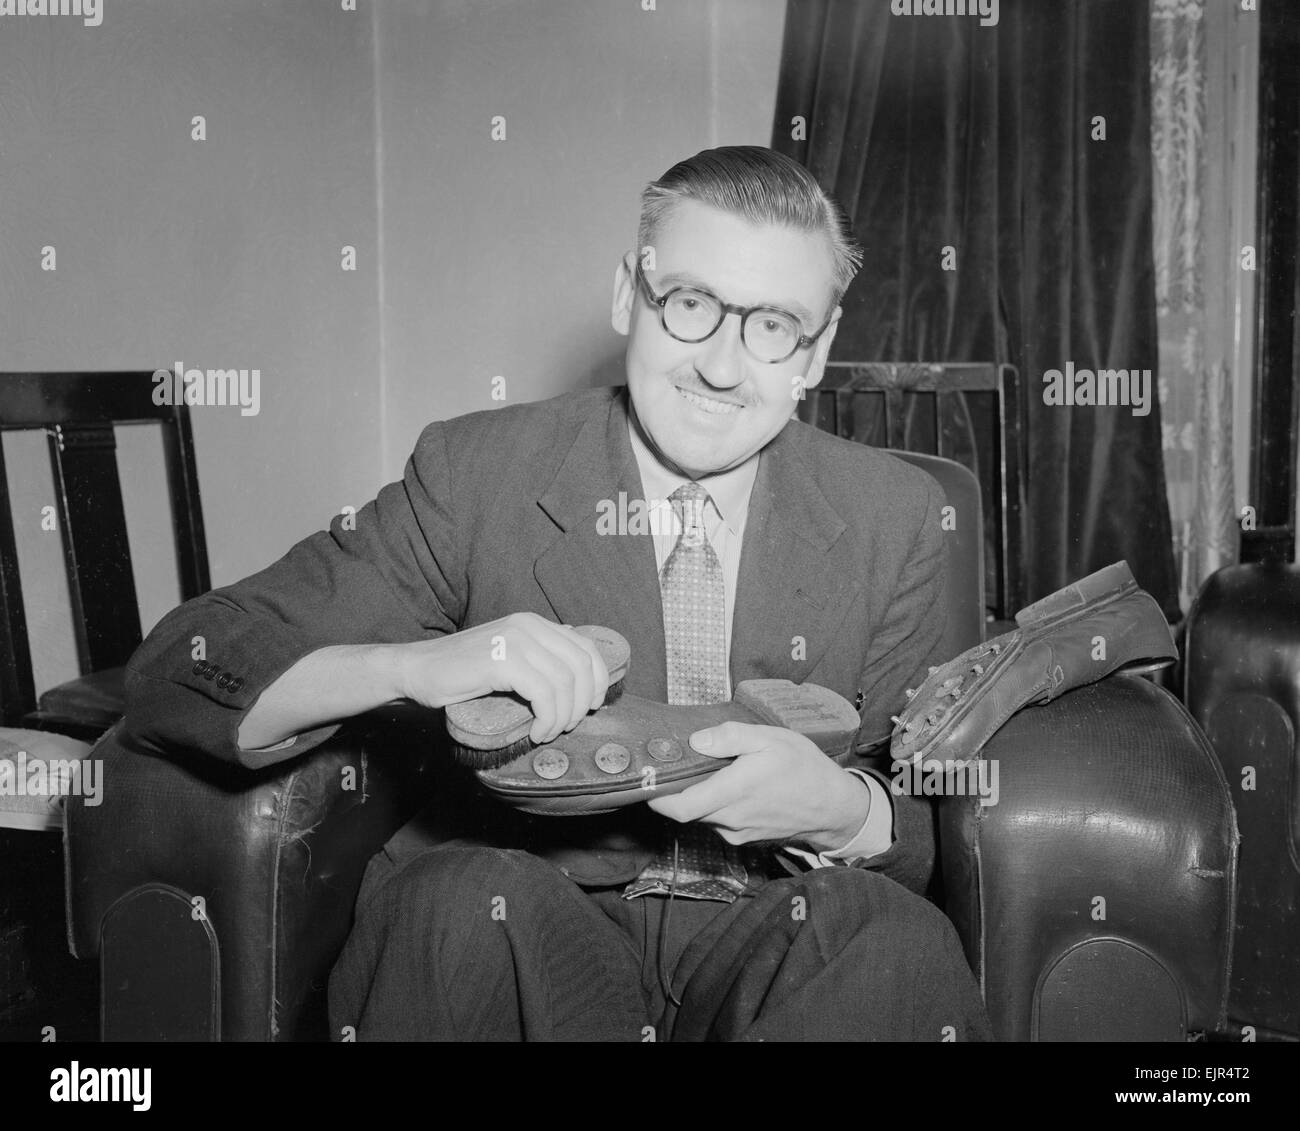 Mr Robert Hope seen here cleaning his shoes, 1st September 1953 *** Local Caption *** watscan - - 21/01/2010 Stock Photo